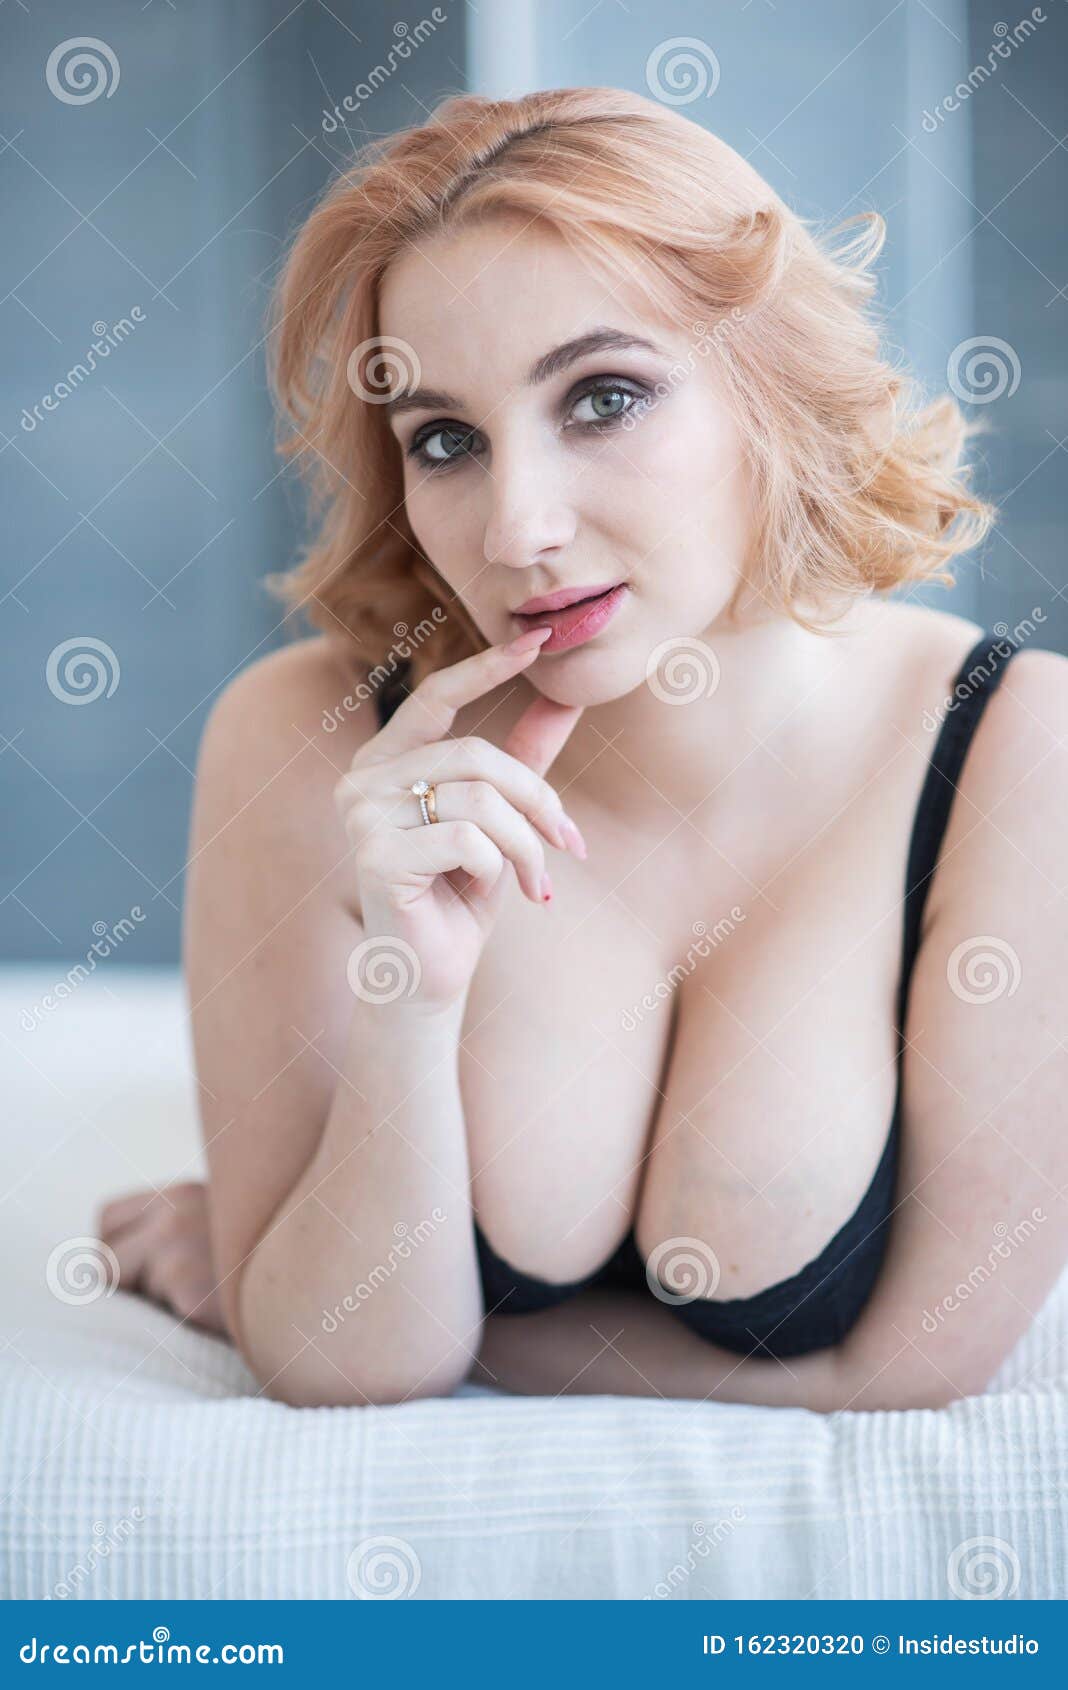 A European Girl with a Cute Face and Big Breasts in Black